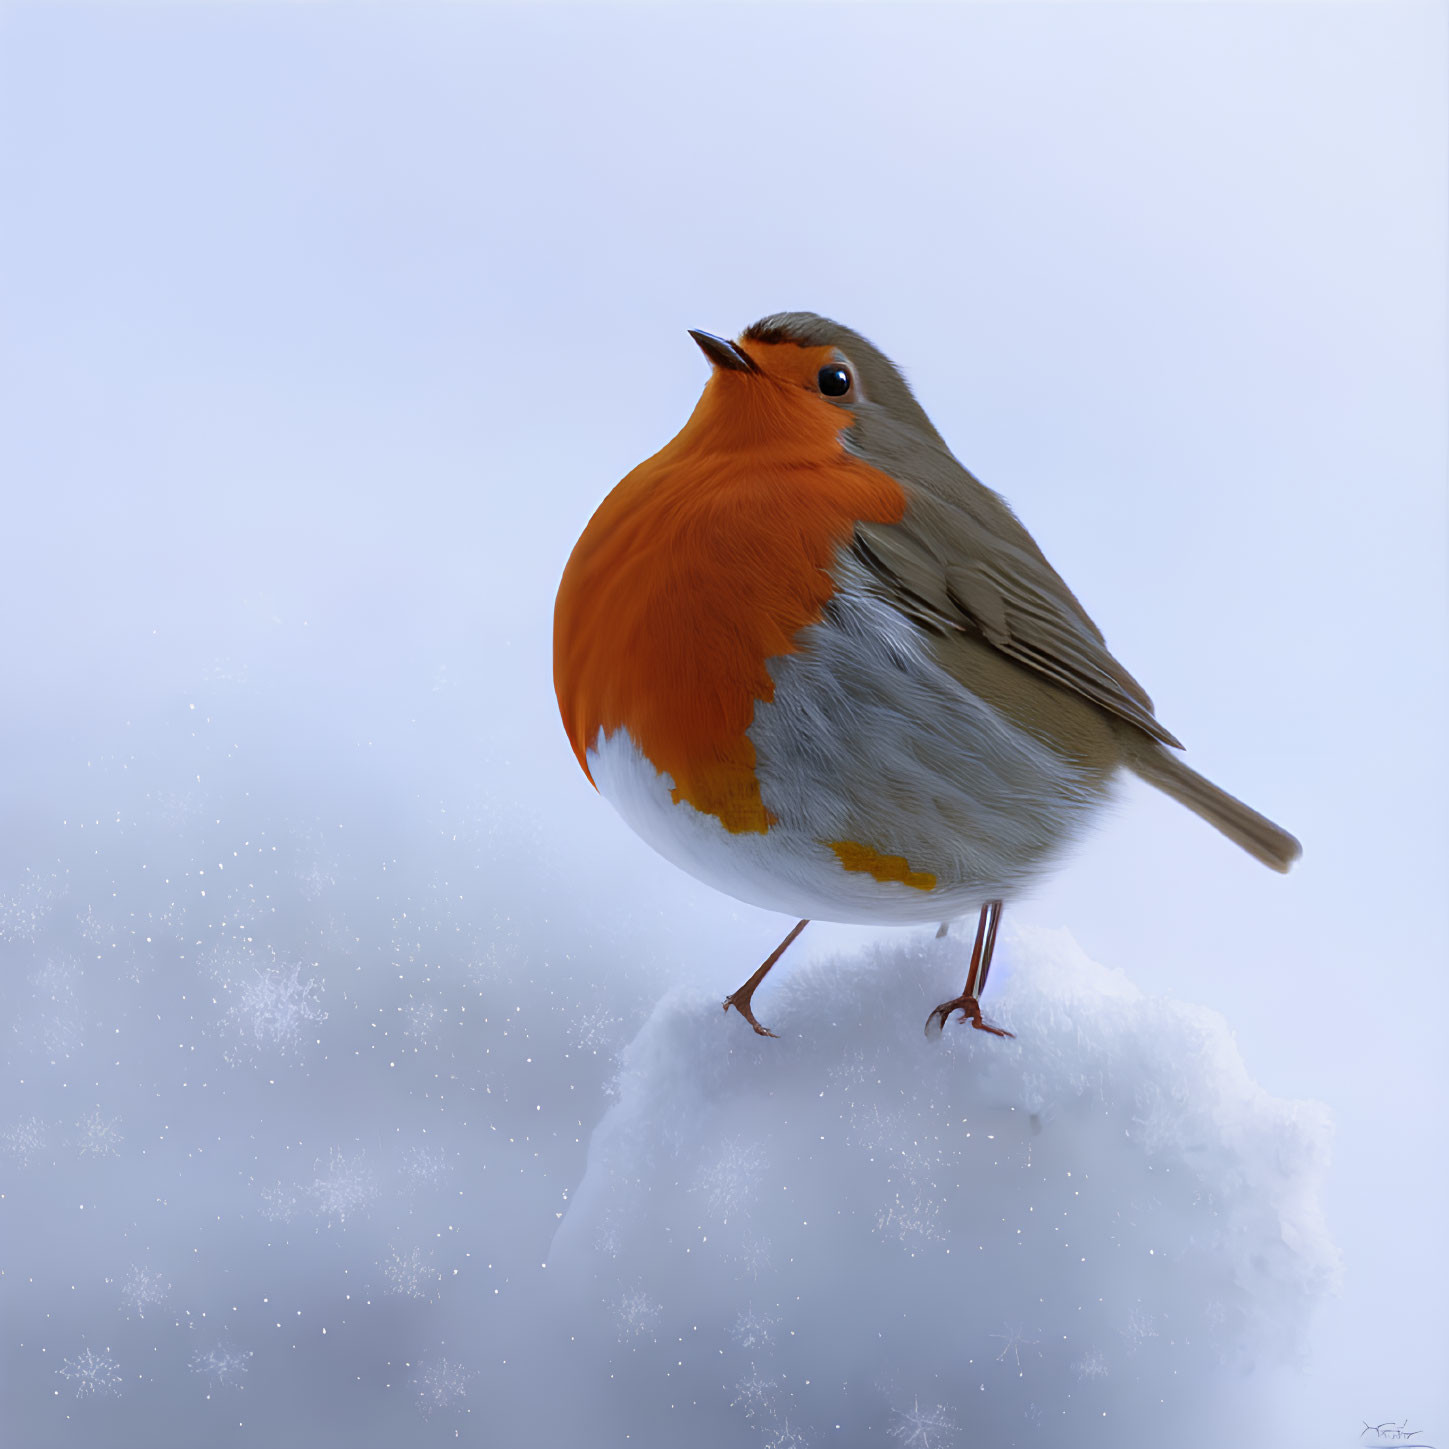 Plump robin with bright orange breast on snowy background